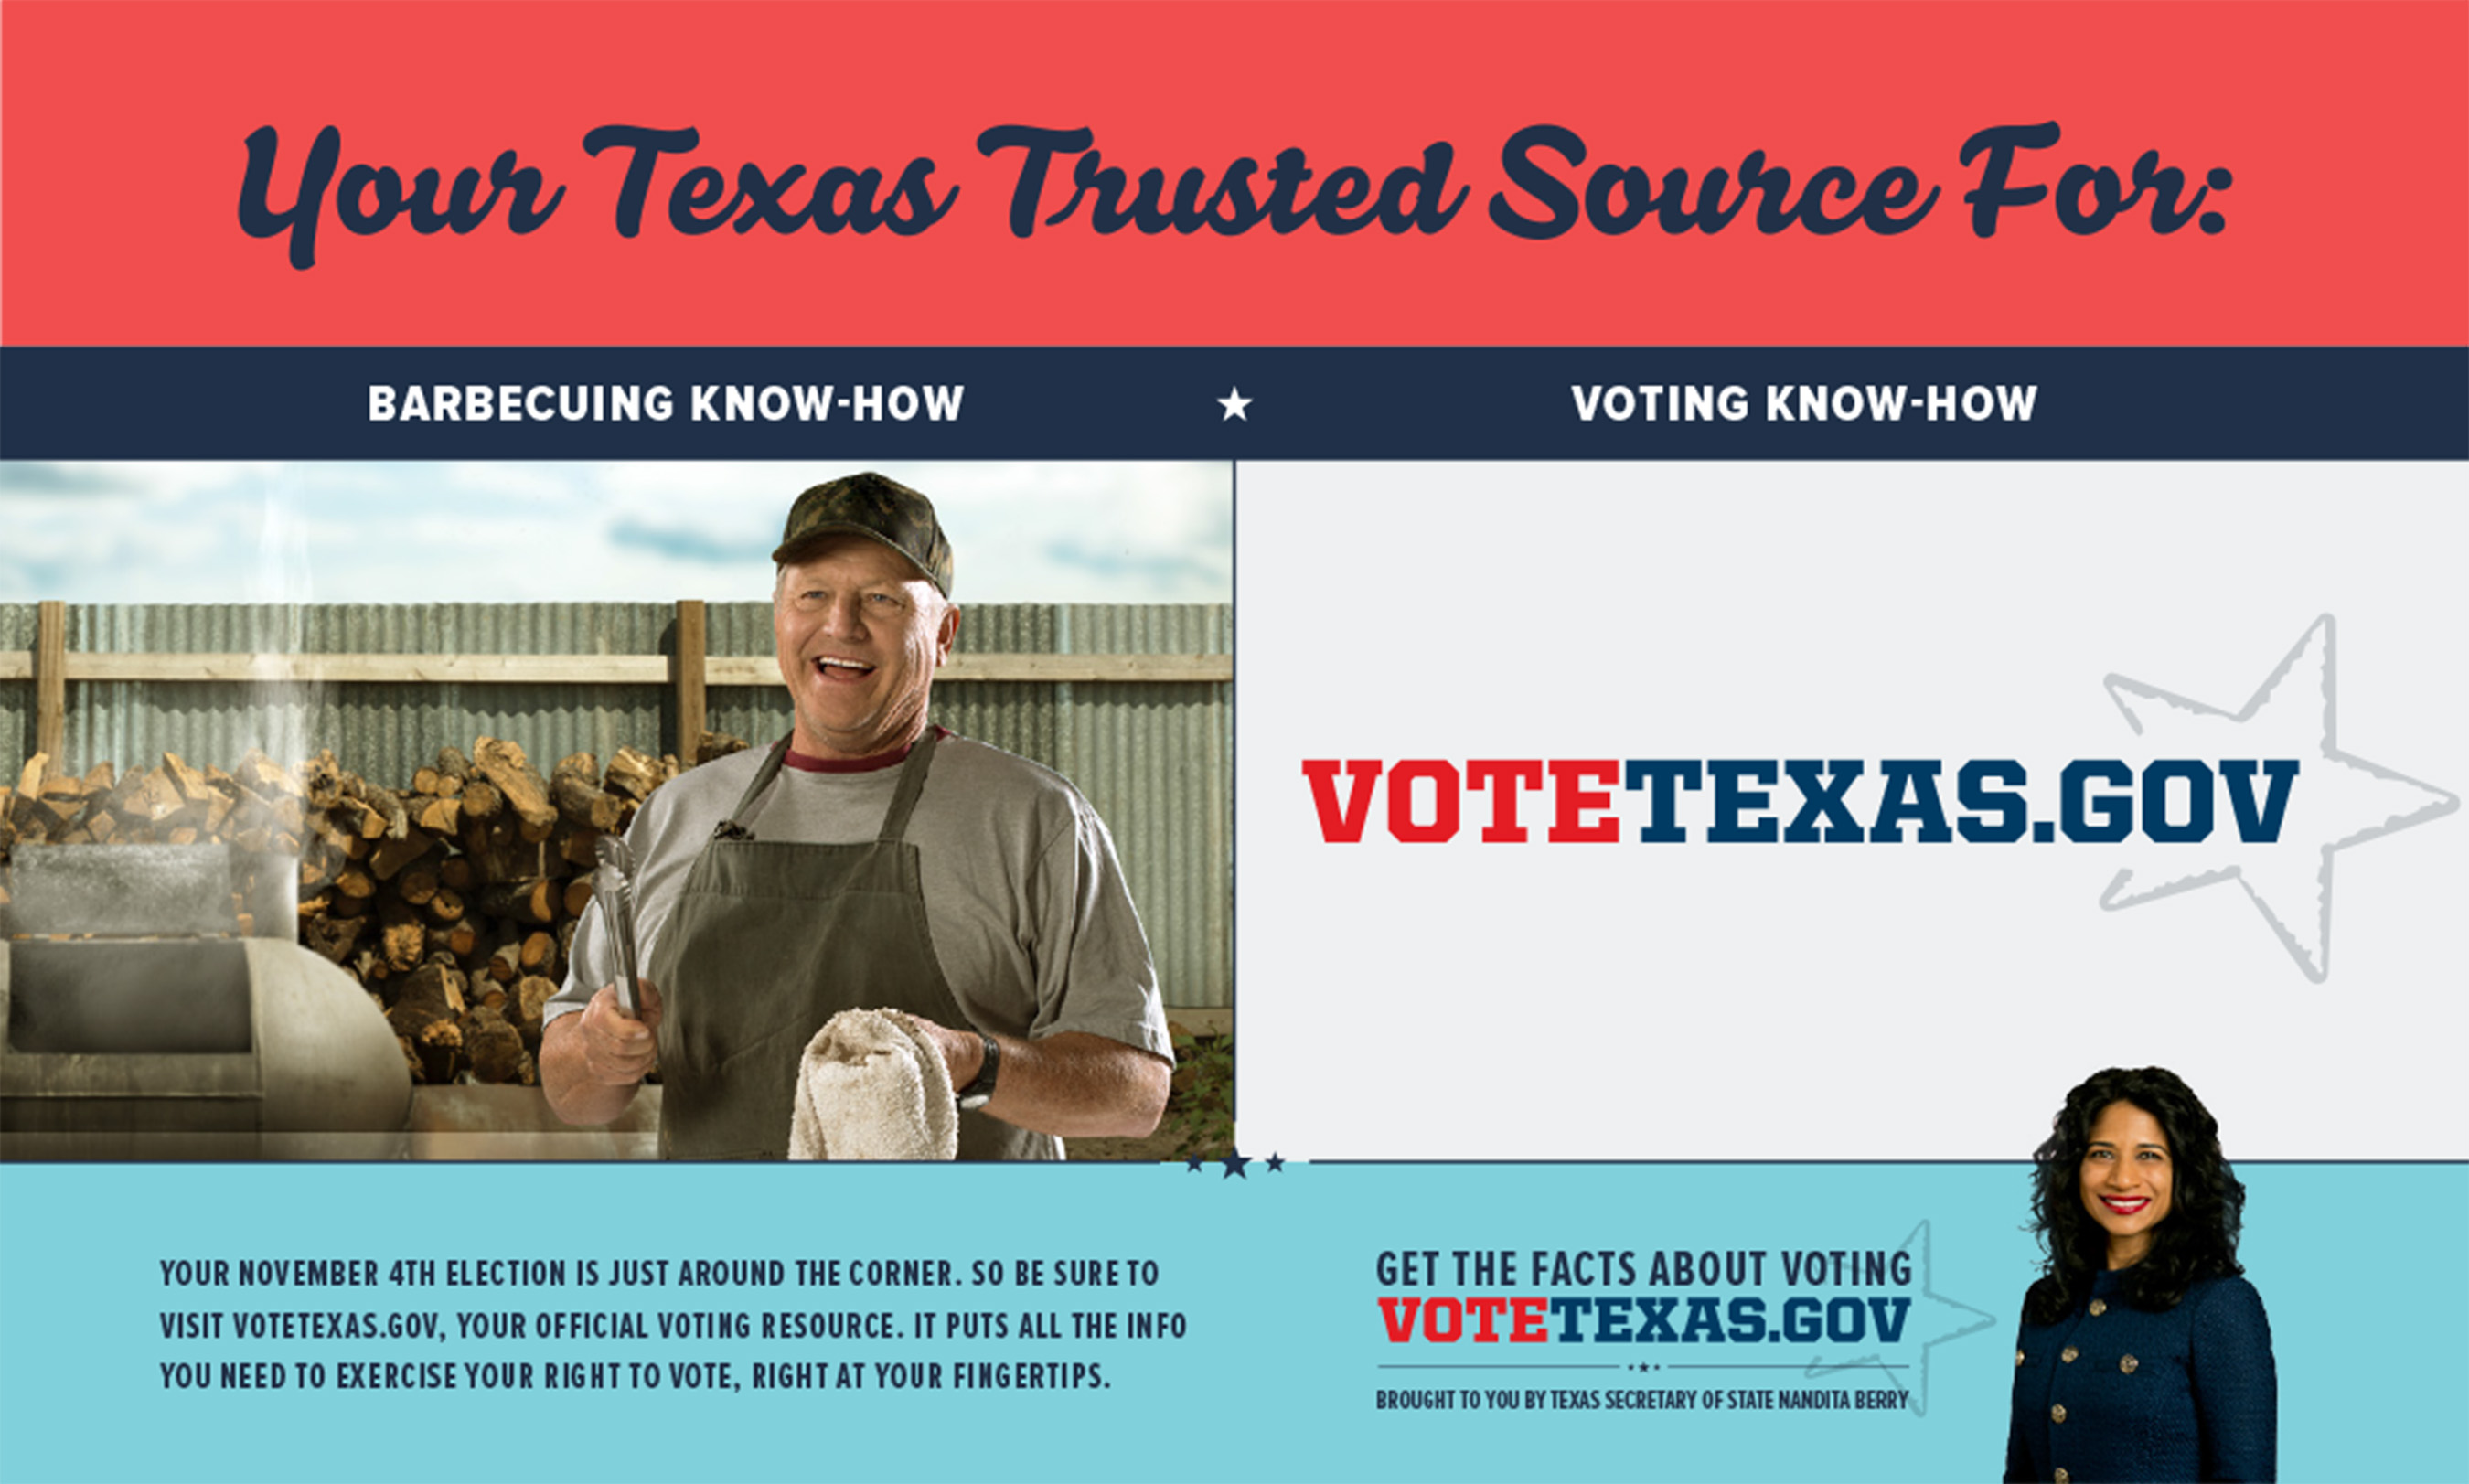 VoteTexas.gov is your trusted resource voting know-how in Texas.